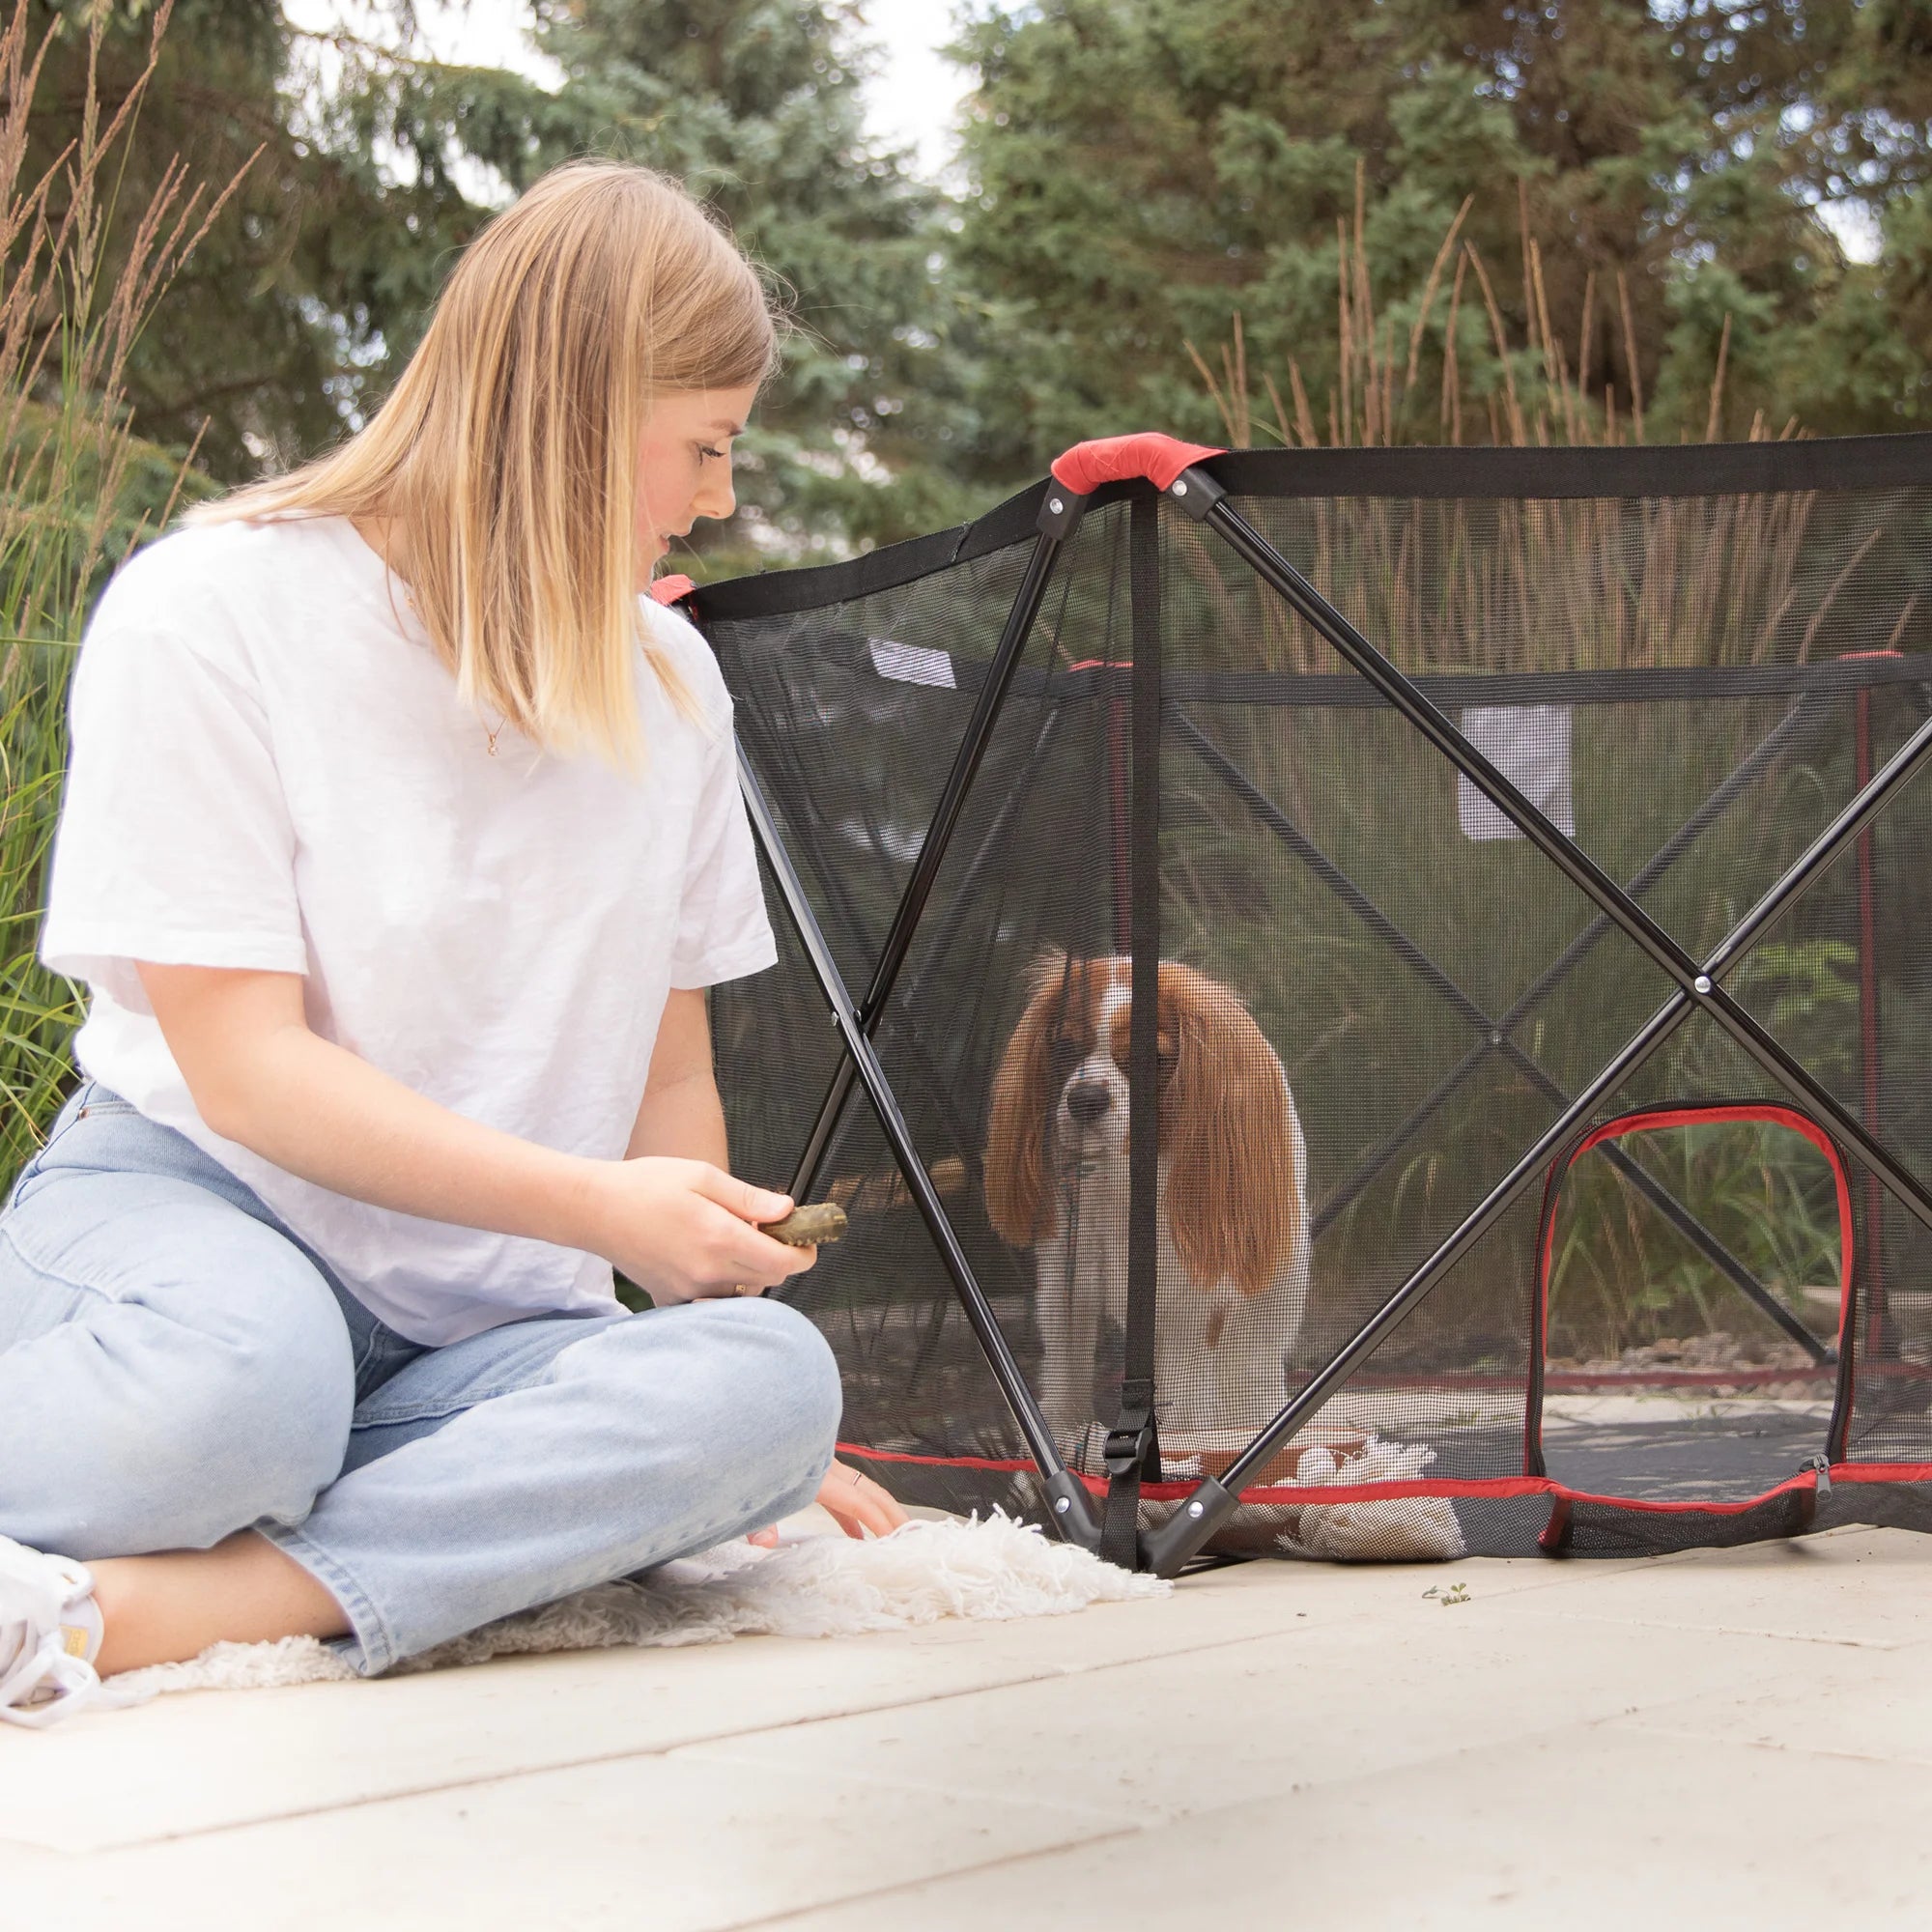 Woman holding treat next to Portable Pet Pen while dog looks at treat.